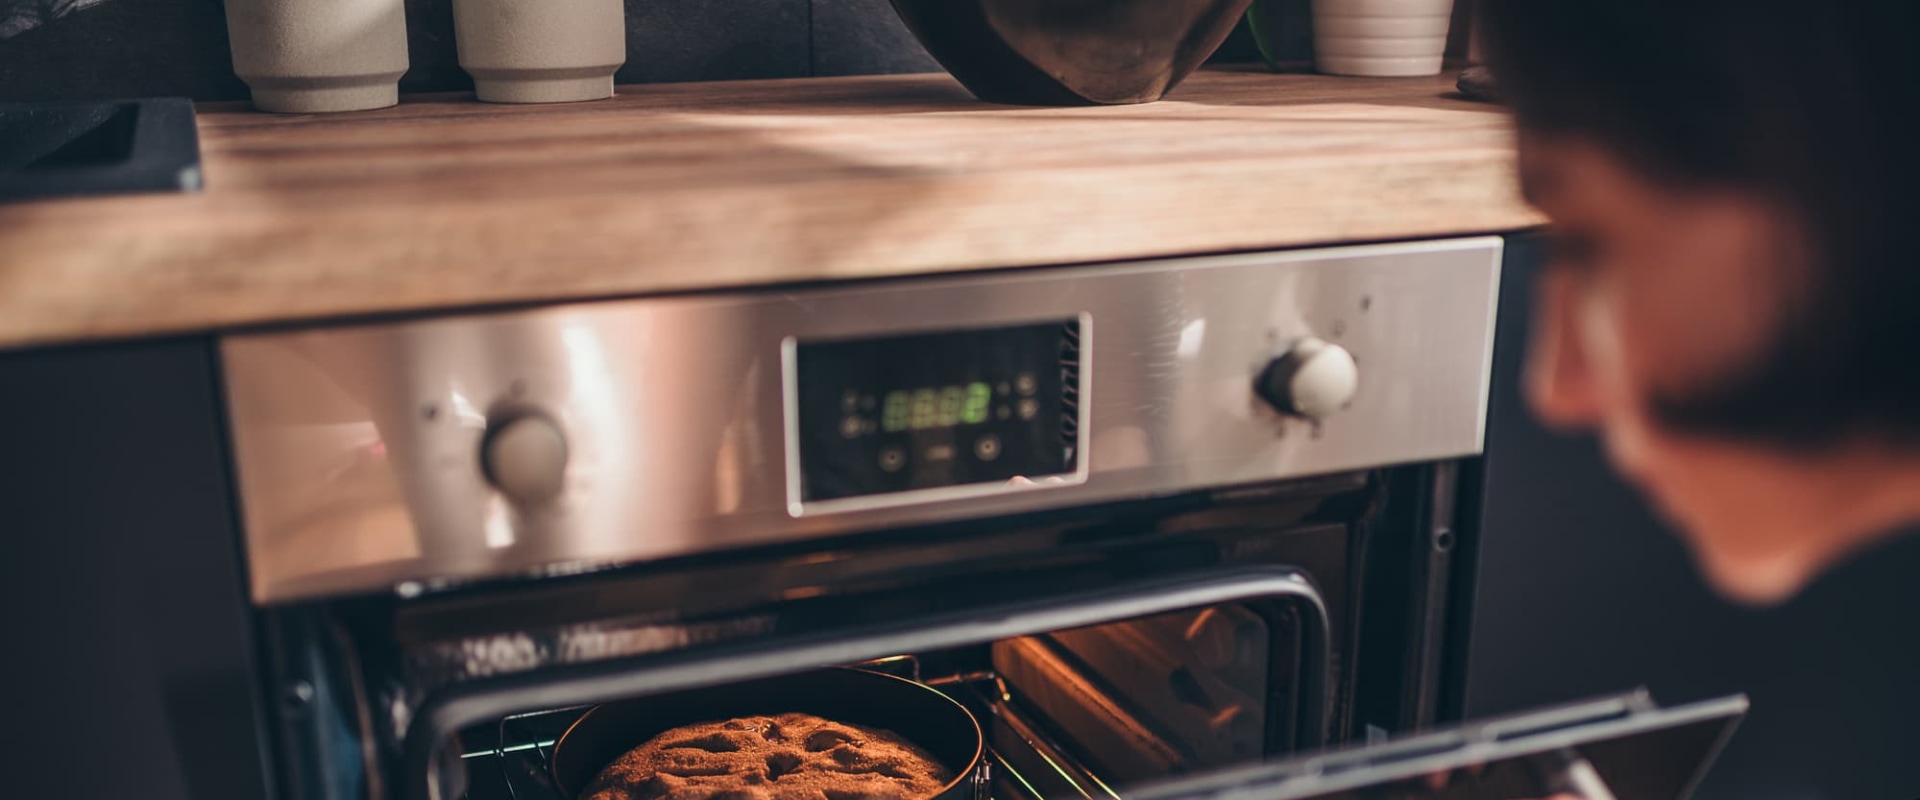 What are the signs that an appliance needs to be repaired?